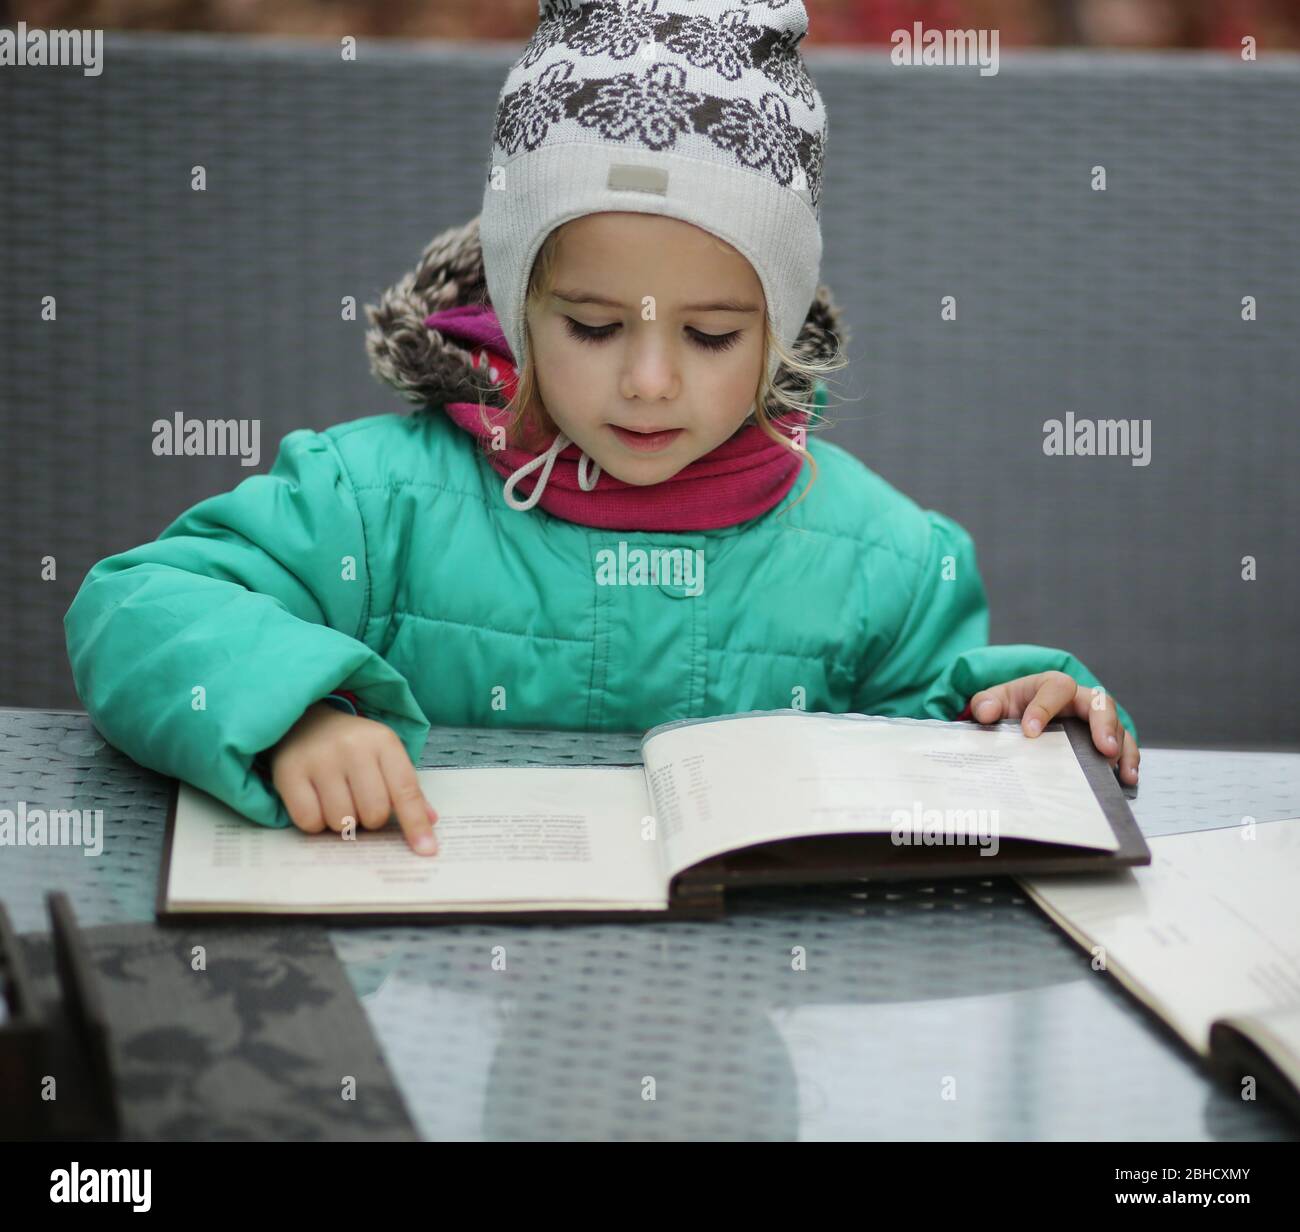 Three year old girl reading a menu in the outdoor cafe terrace Stock Photo